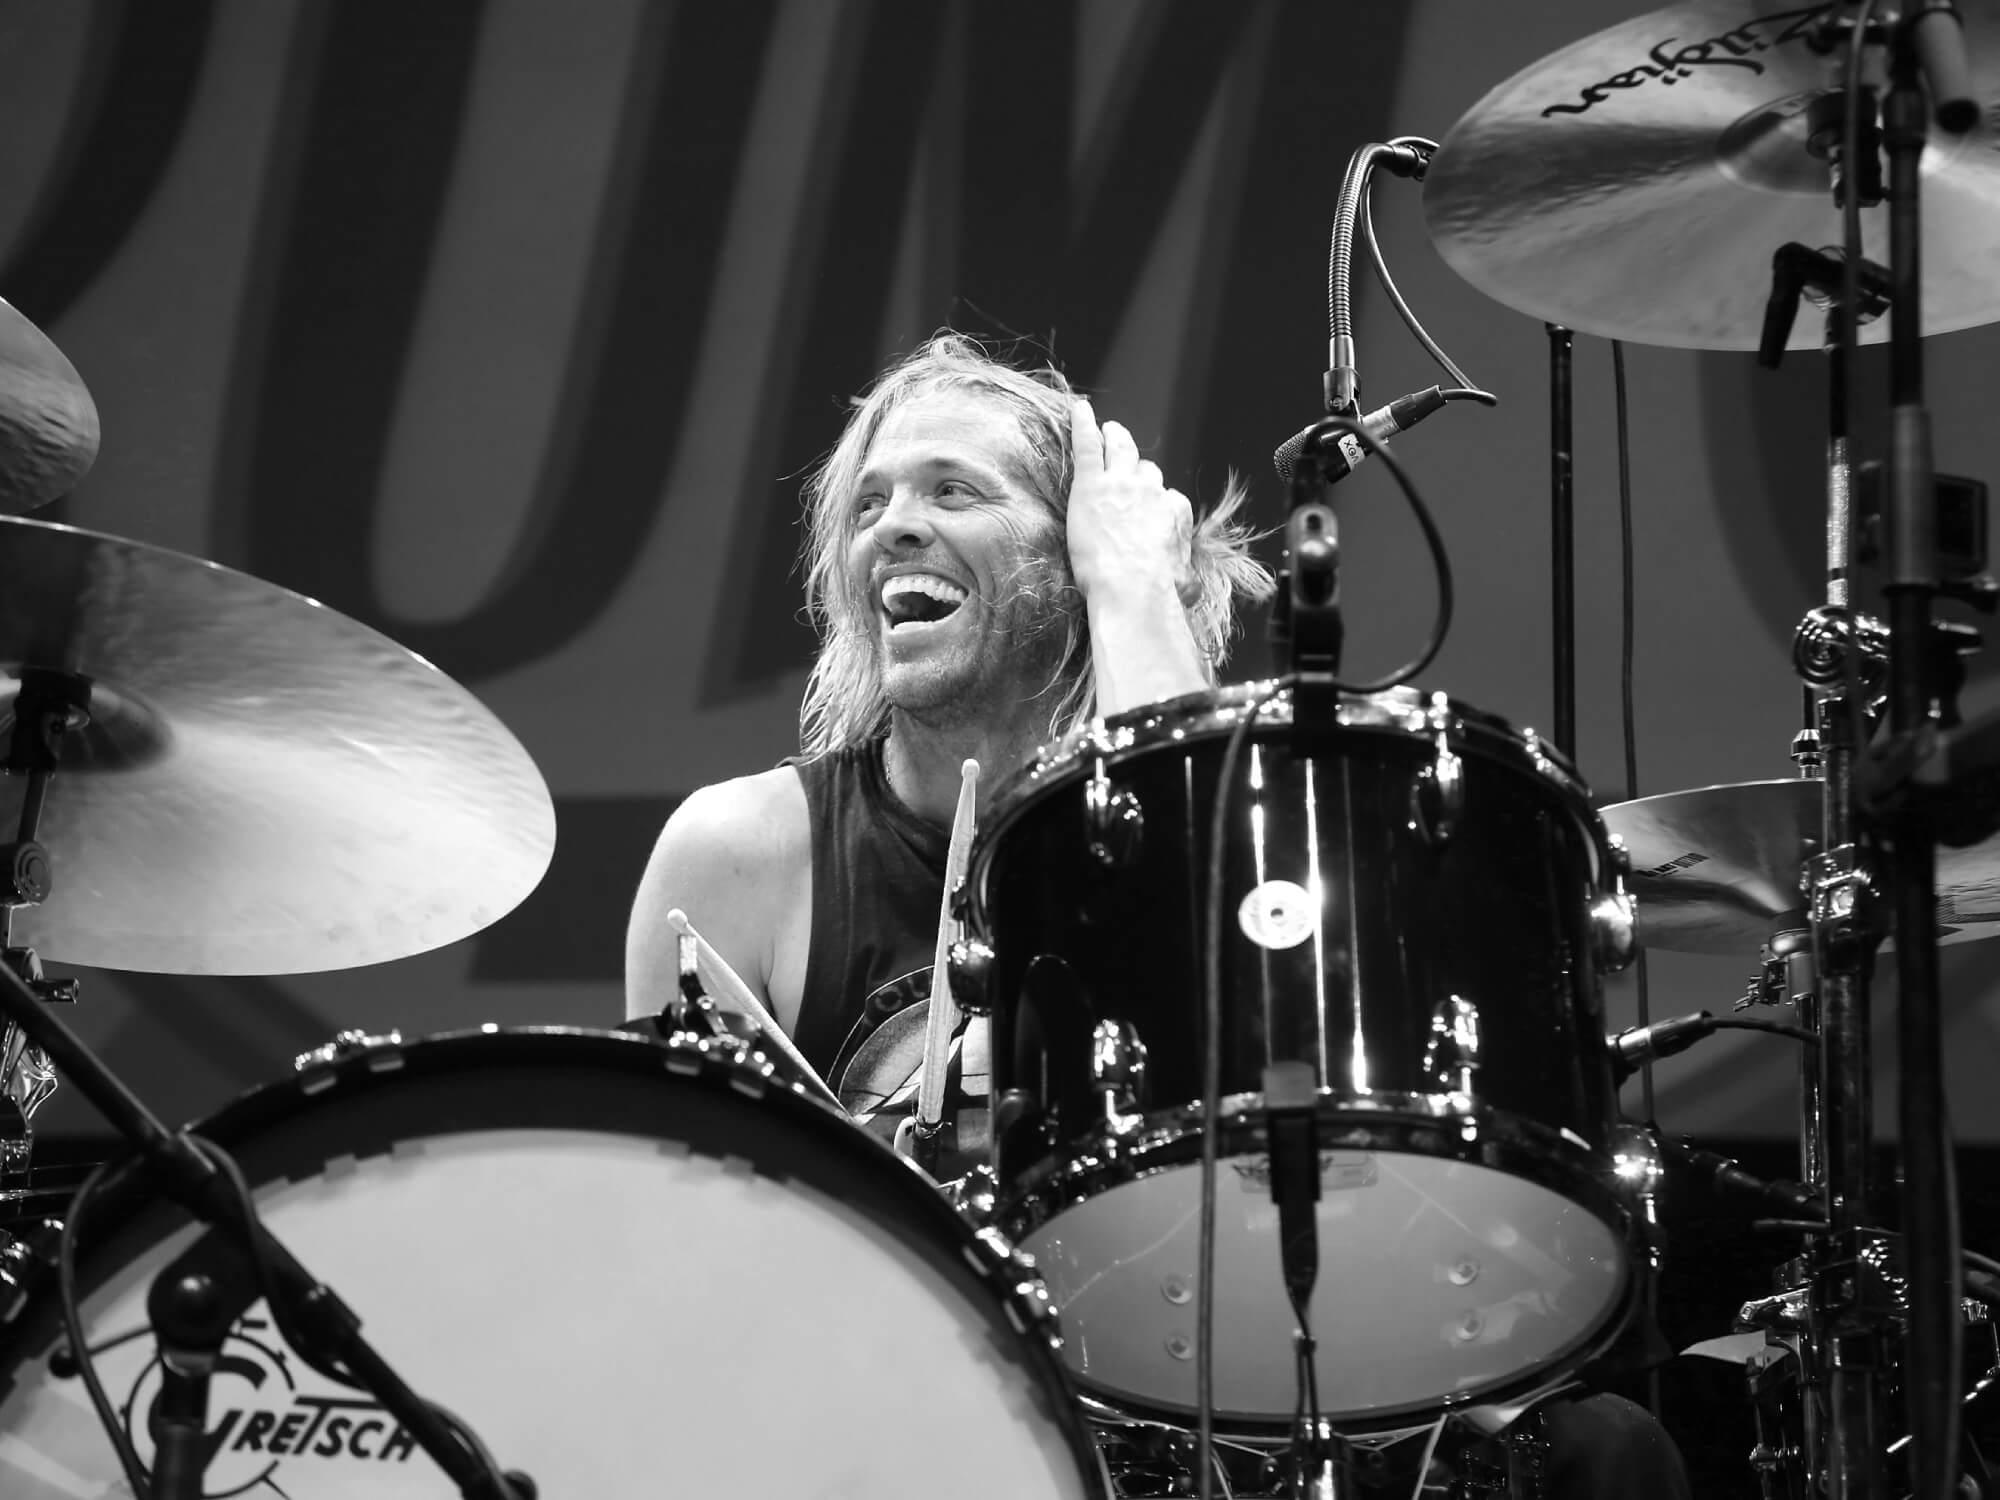 Taylor Hawkins’ wife thanks fans in her first statement since the drummer’s death: “Taylor has valued his dream role in Foo Fighters every minute of their 25 years with them” |  Guitar.com